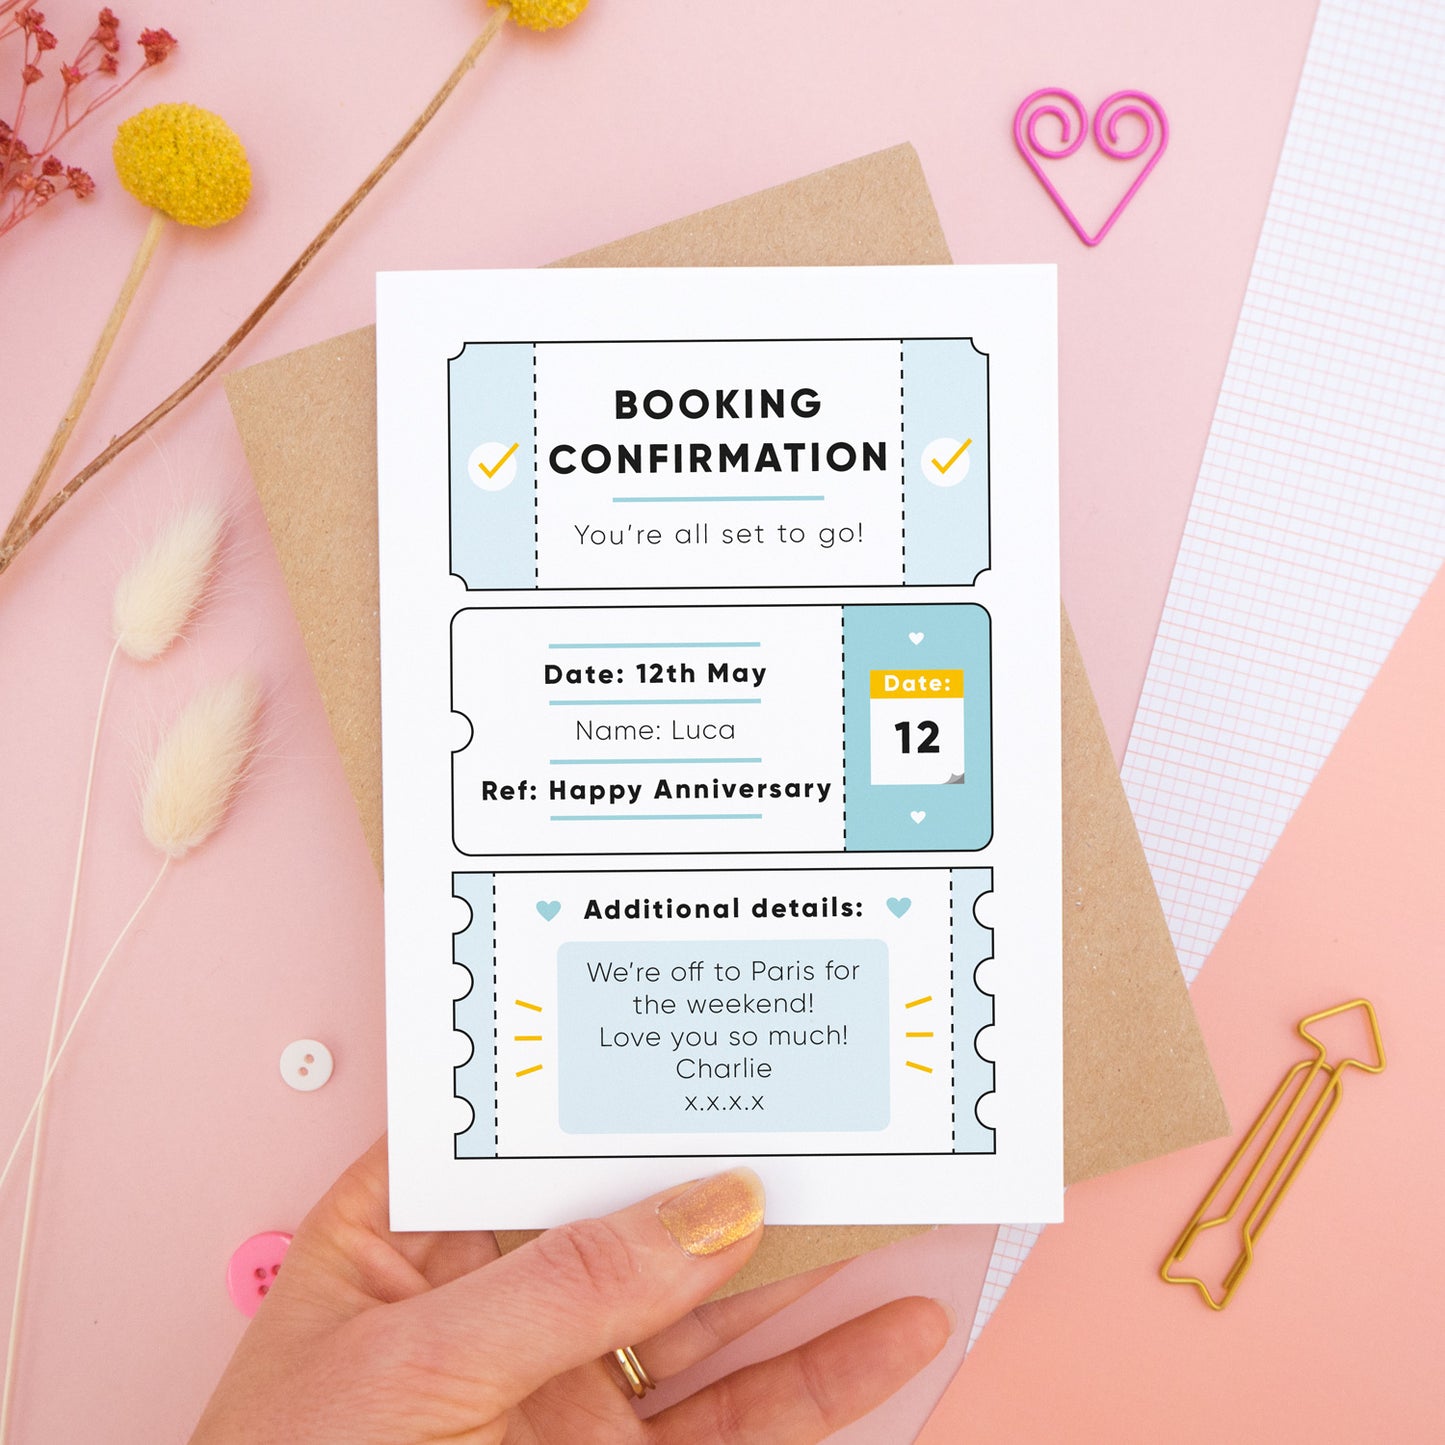 A personalised anniversary booking confirmation gift card held in front of a pink background scattered with dry flowers, grid paper, buttons and a heart. Pictured is the blue version of the card on top of a kraft brown envelope.